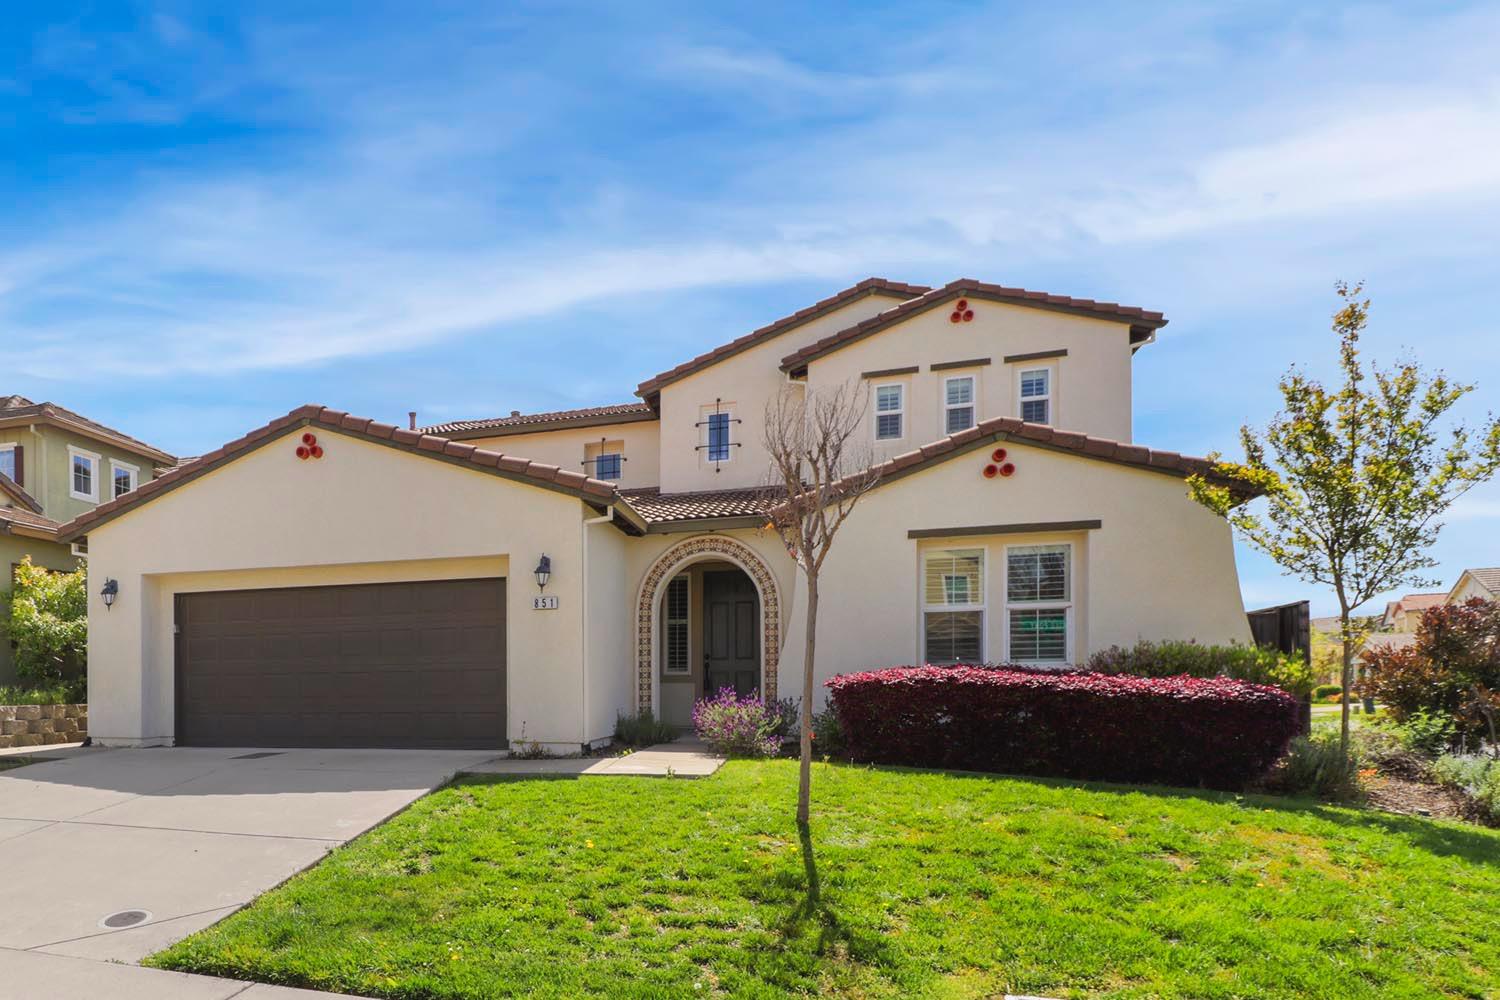 Photo of 851 Spotted Pony Ln in Rocklin, CA